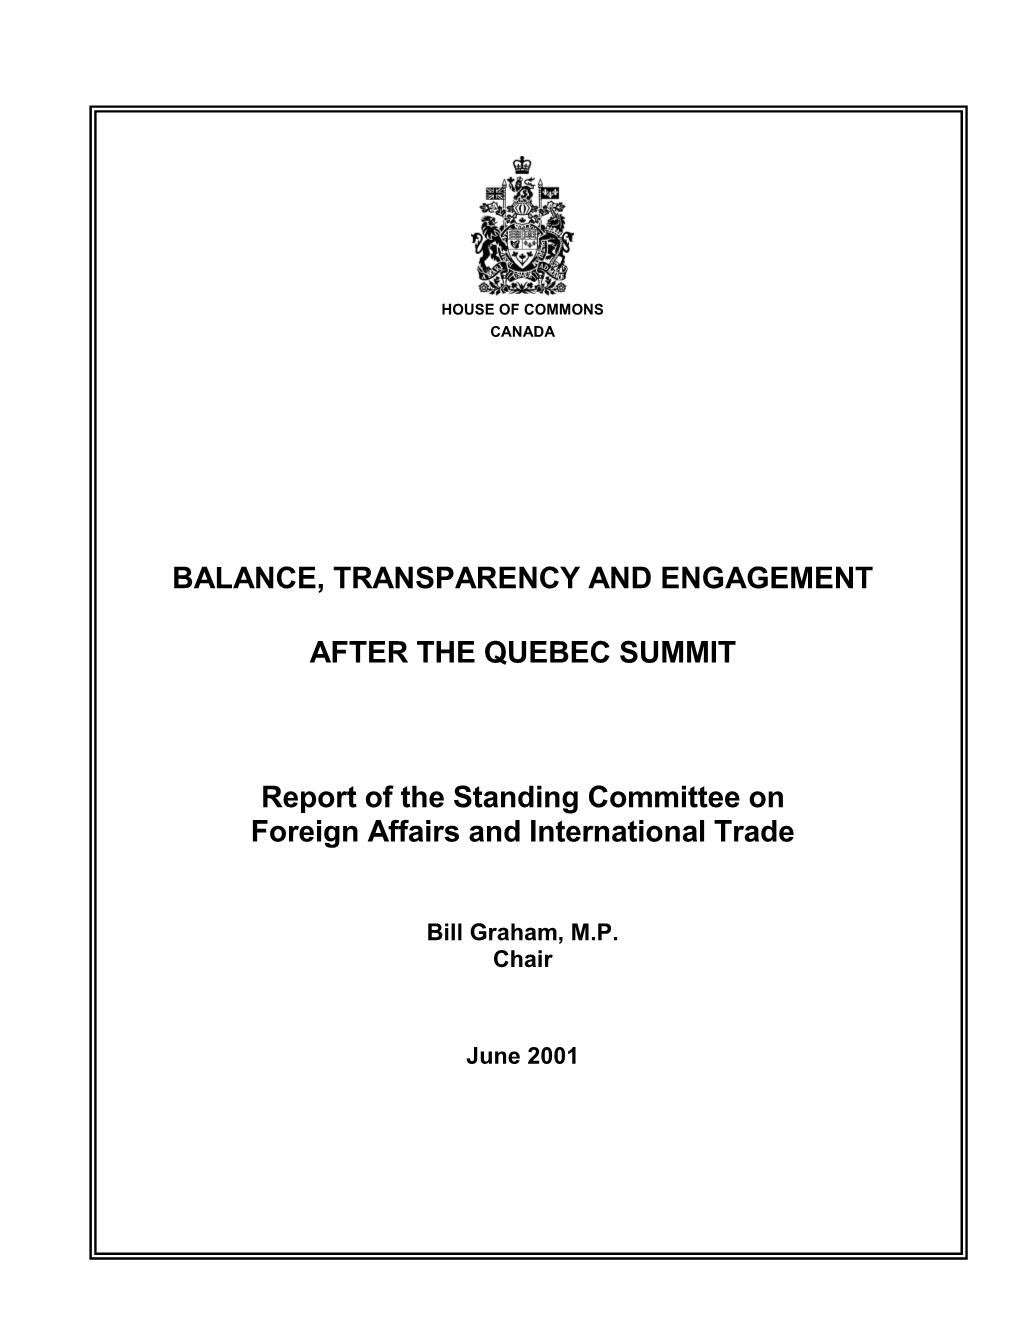 Balance, Transparency and Engagement After the Quebec Summit